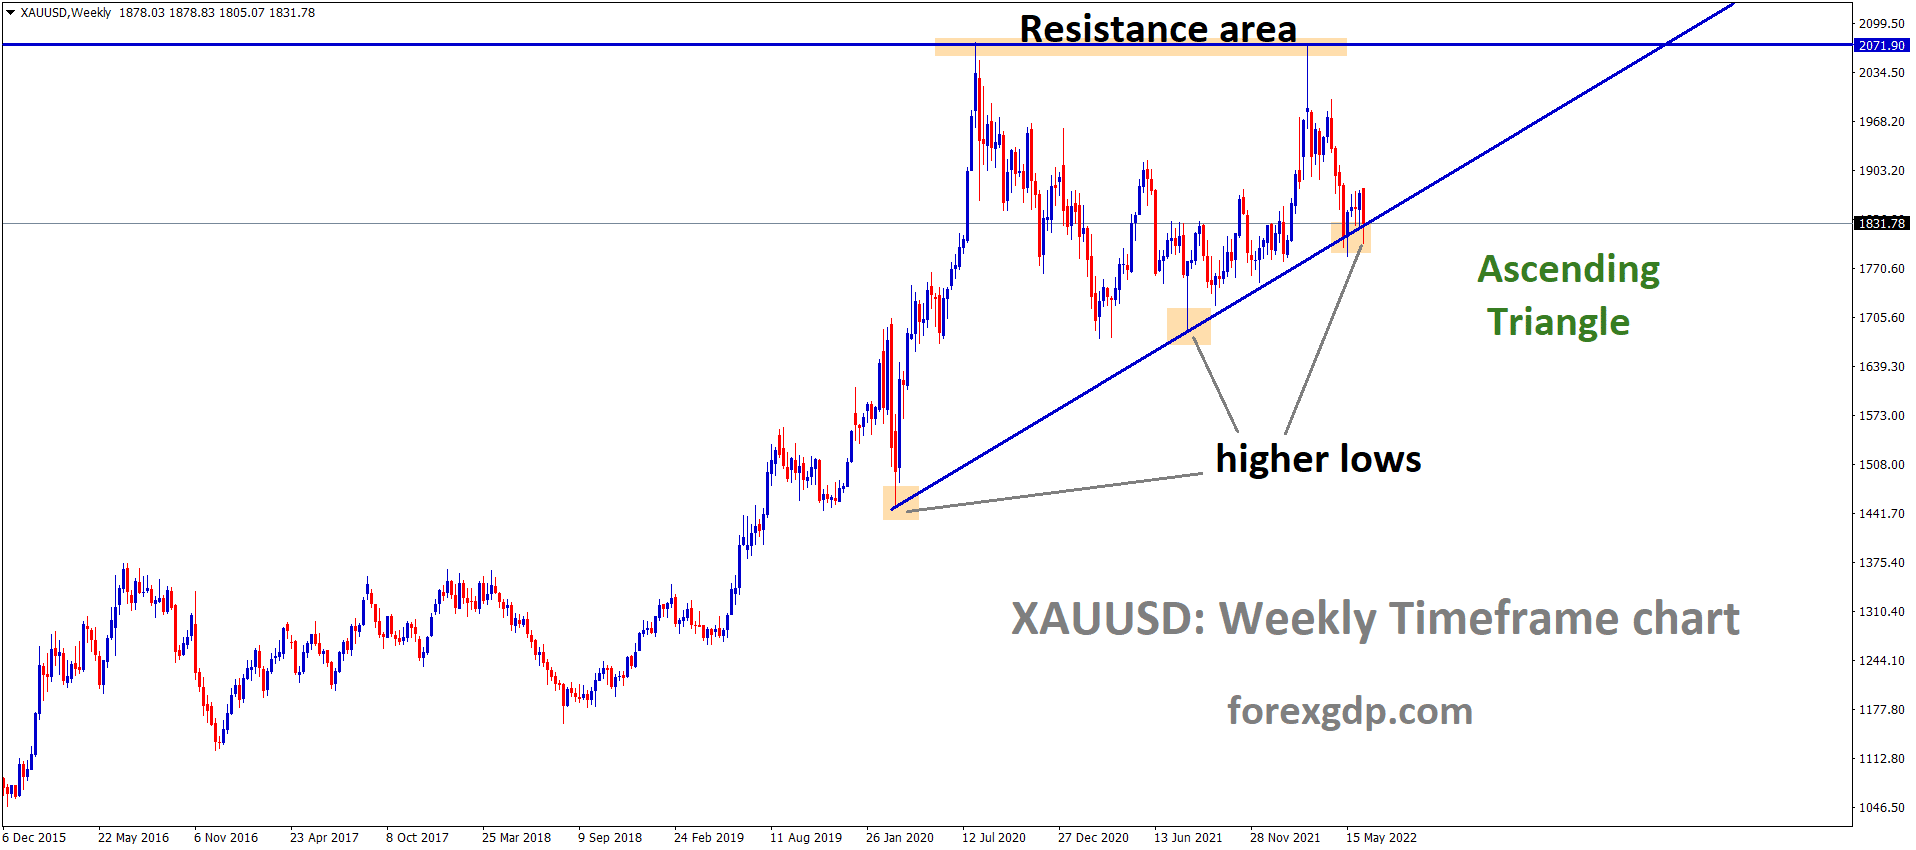 XAUUSD Gold price is moving in an Ascending triangle pattern and the Market has reached the higher low area of the triangle pattern.